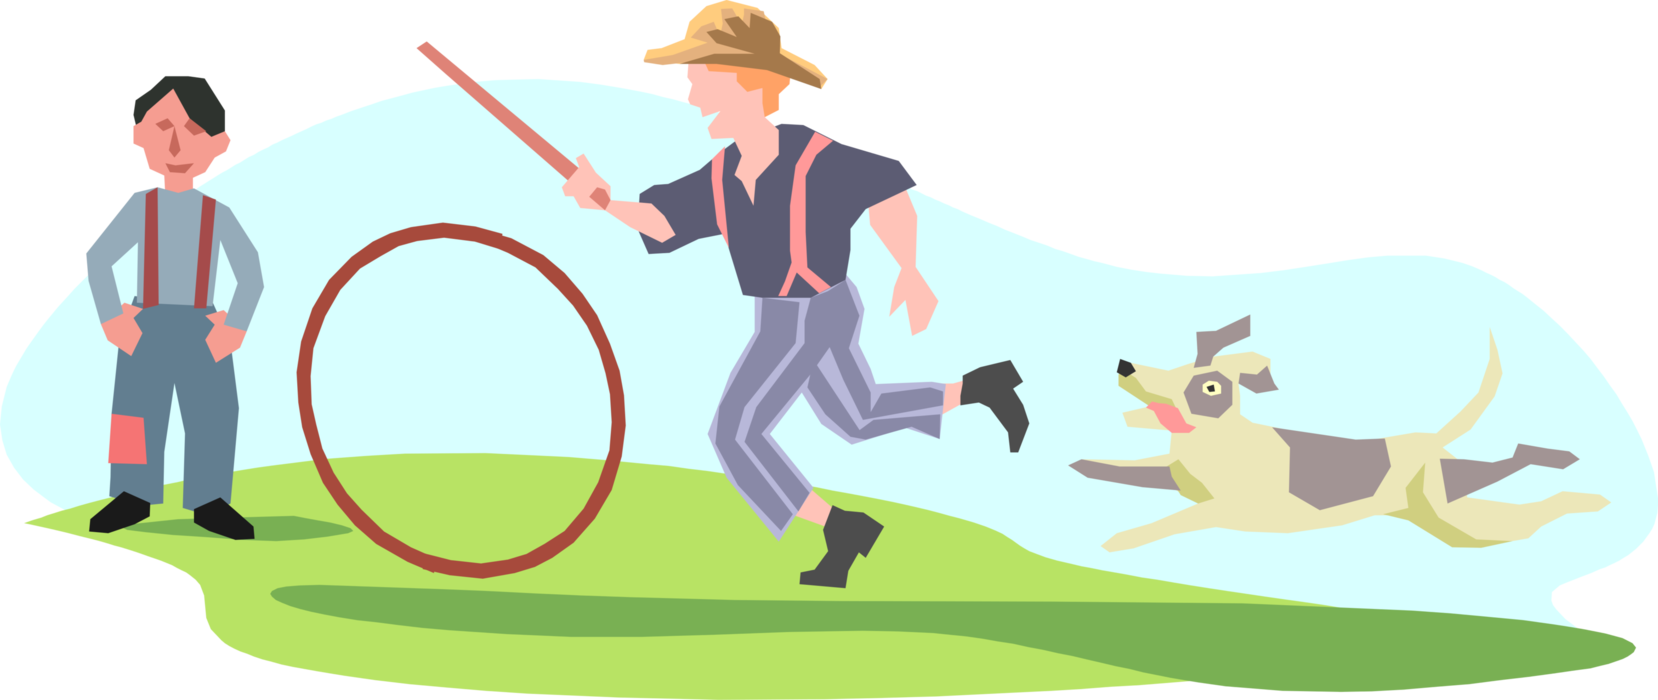 Vector Illustration of Boys Playing with Wheel Hoop and Stick as Dog Gets in on the Fun